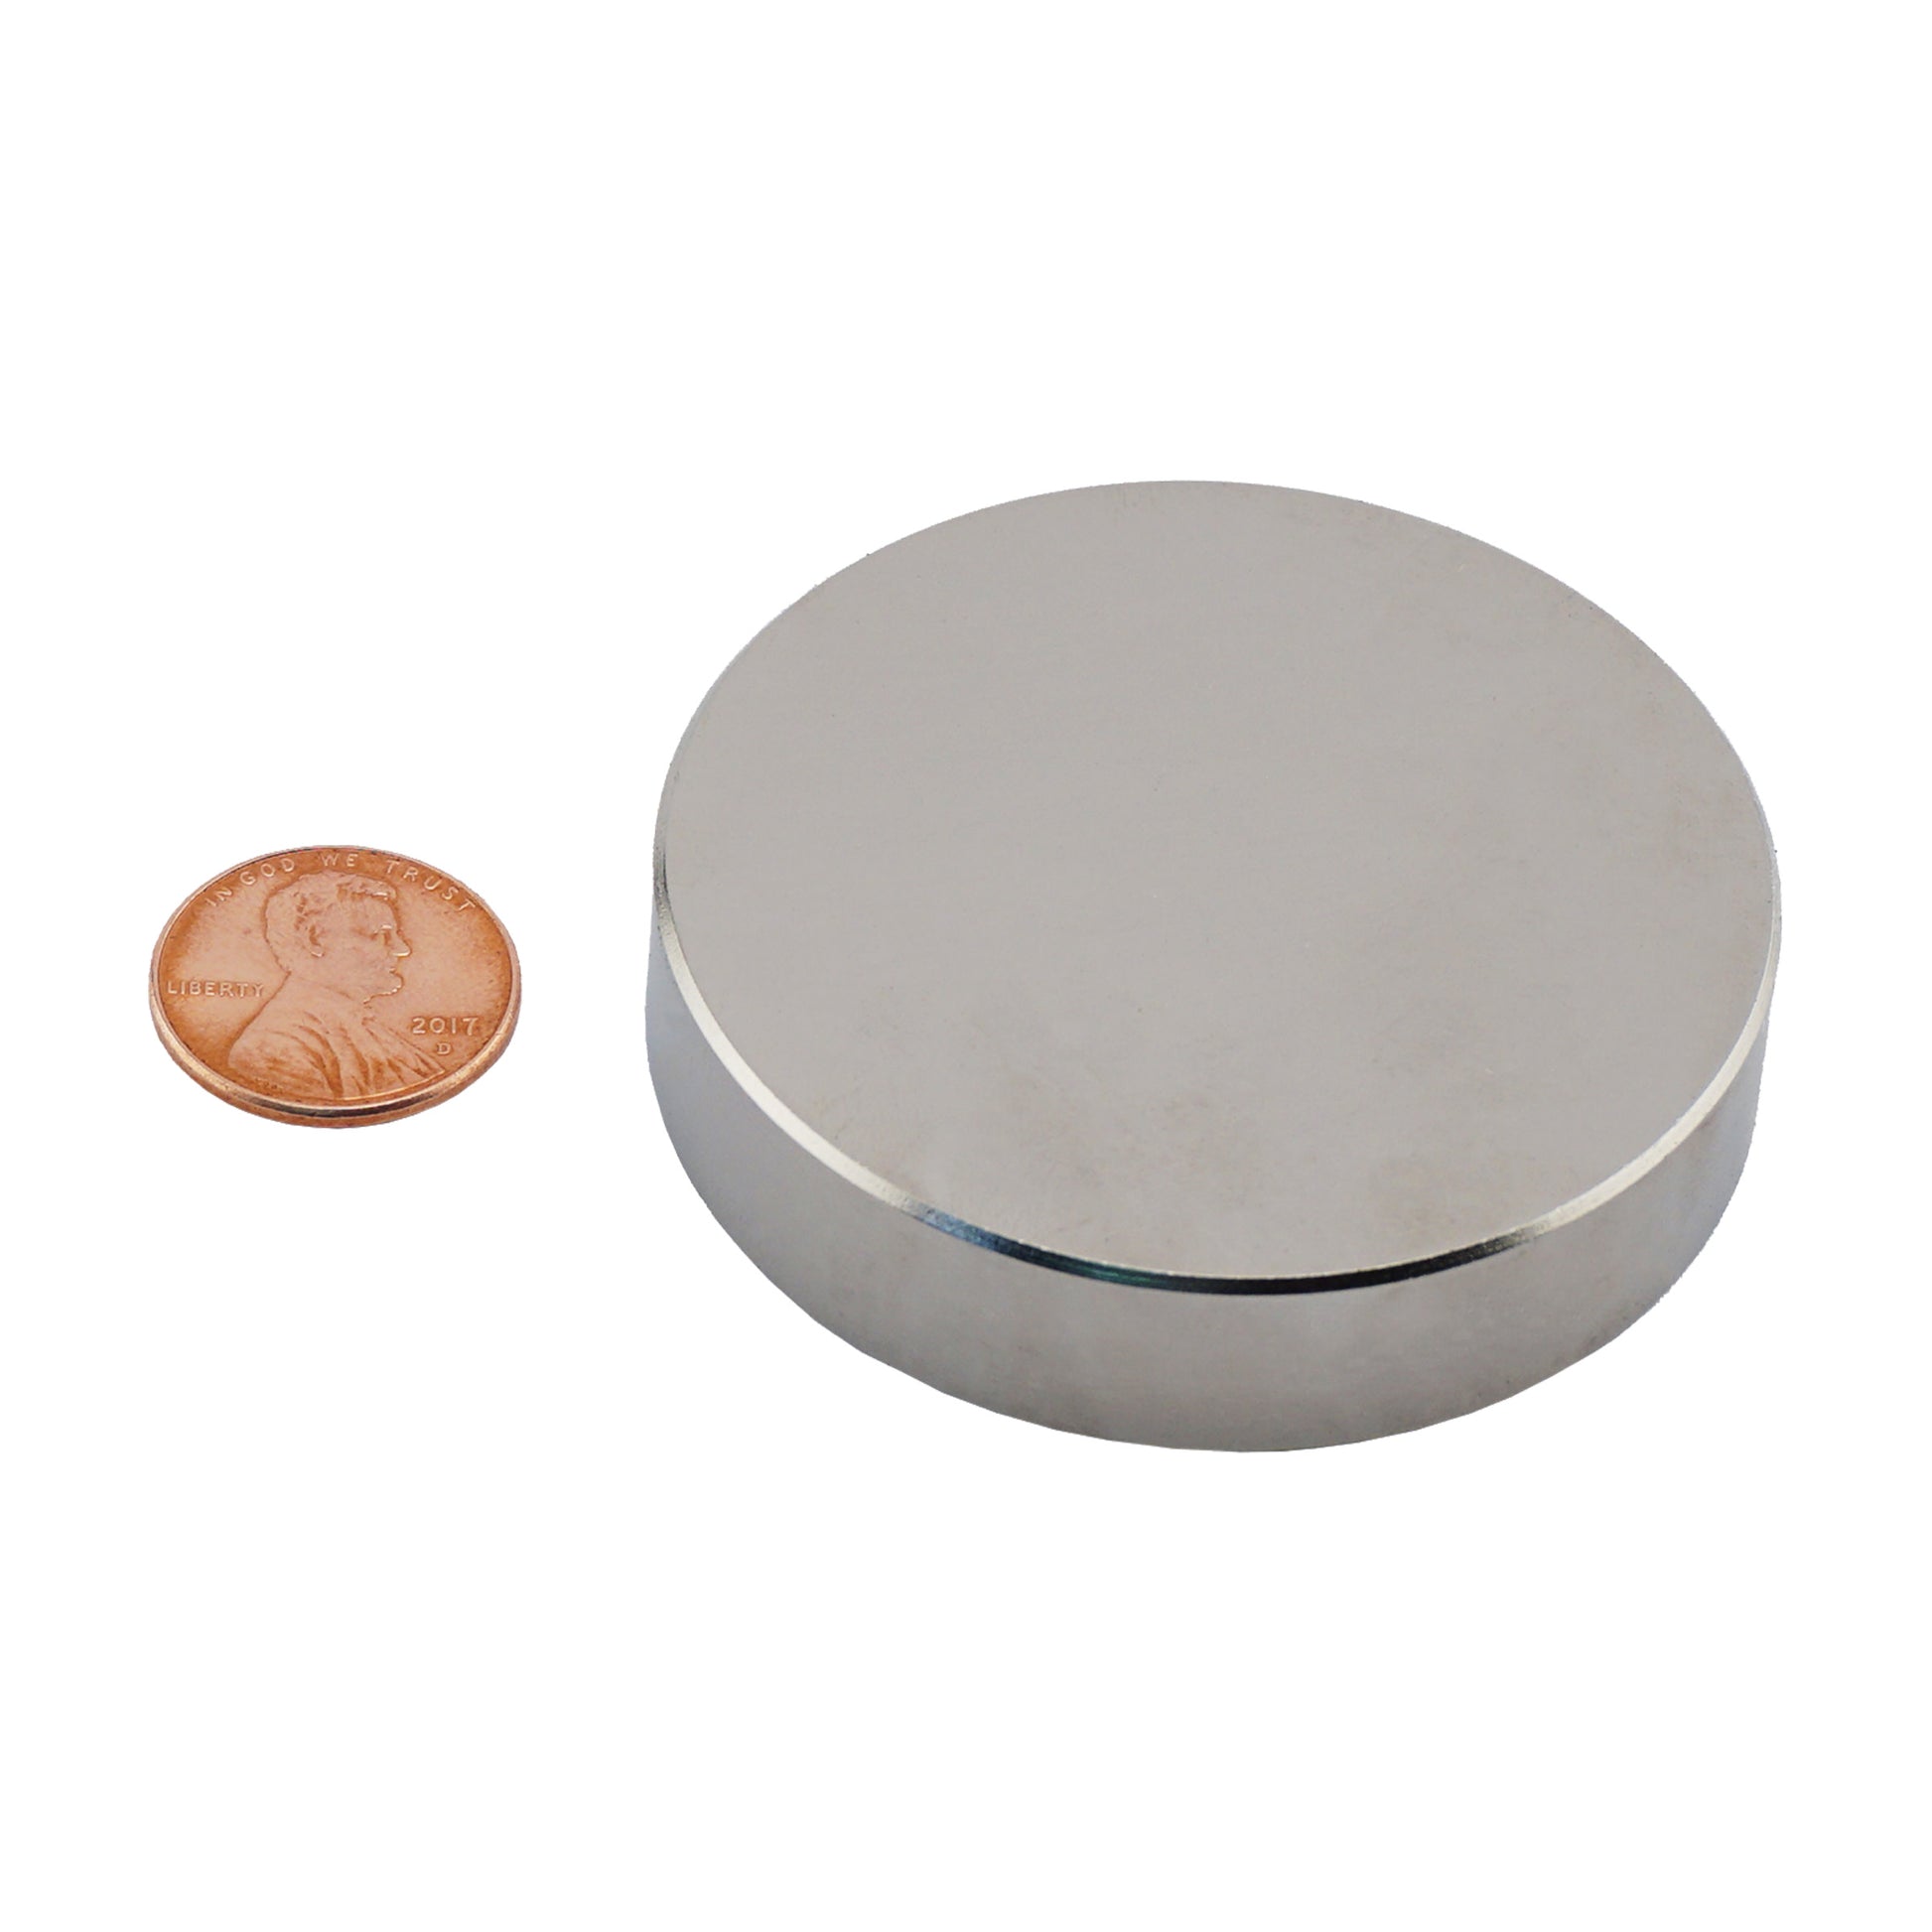 Load image into Gallery viewer, ND022502N Neodymium Disc Magnet - Compared to Penny for Size Reference